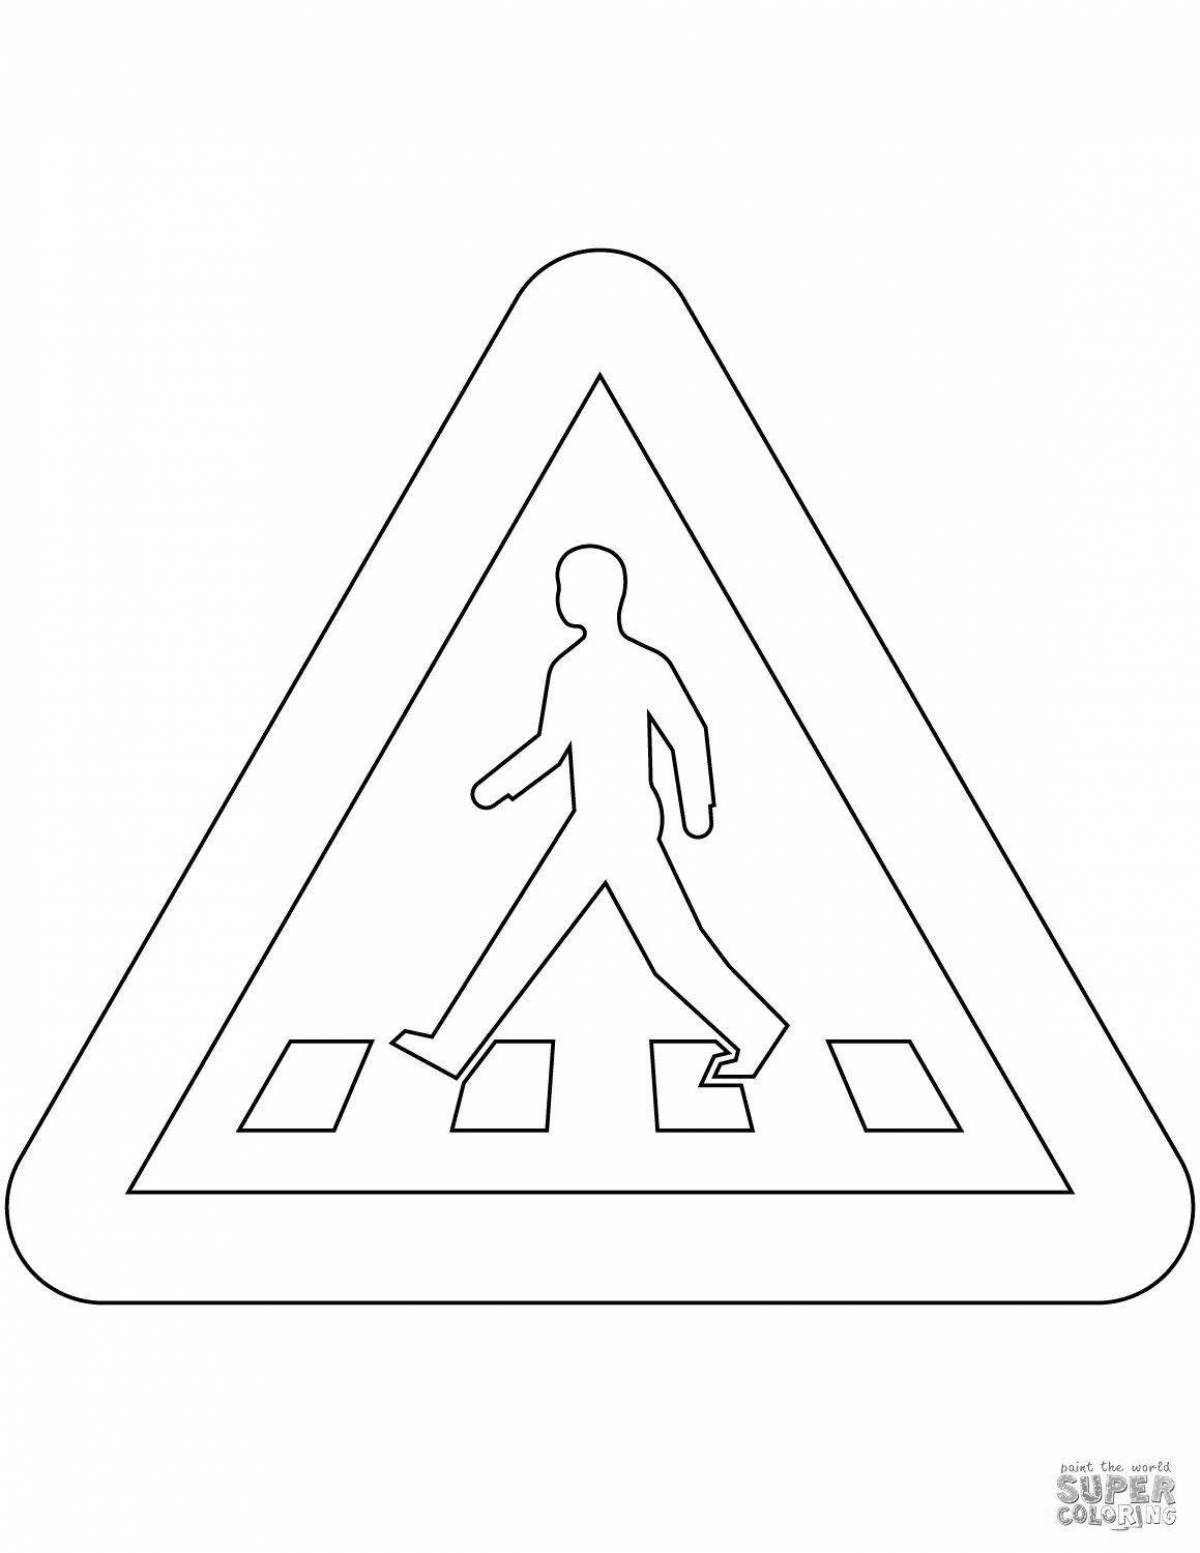 Pedestrian crossing coloring page for 6-7 year olds